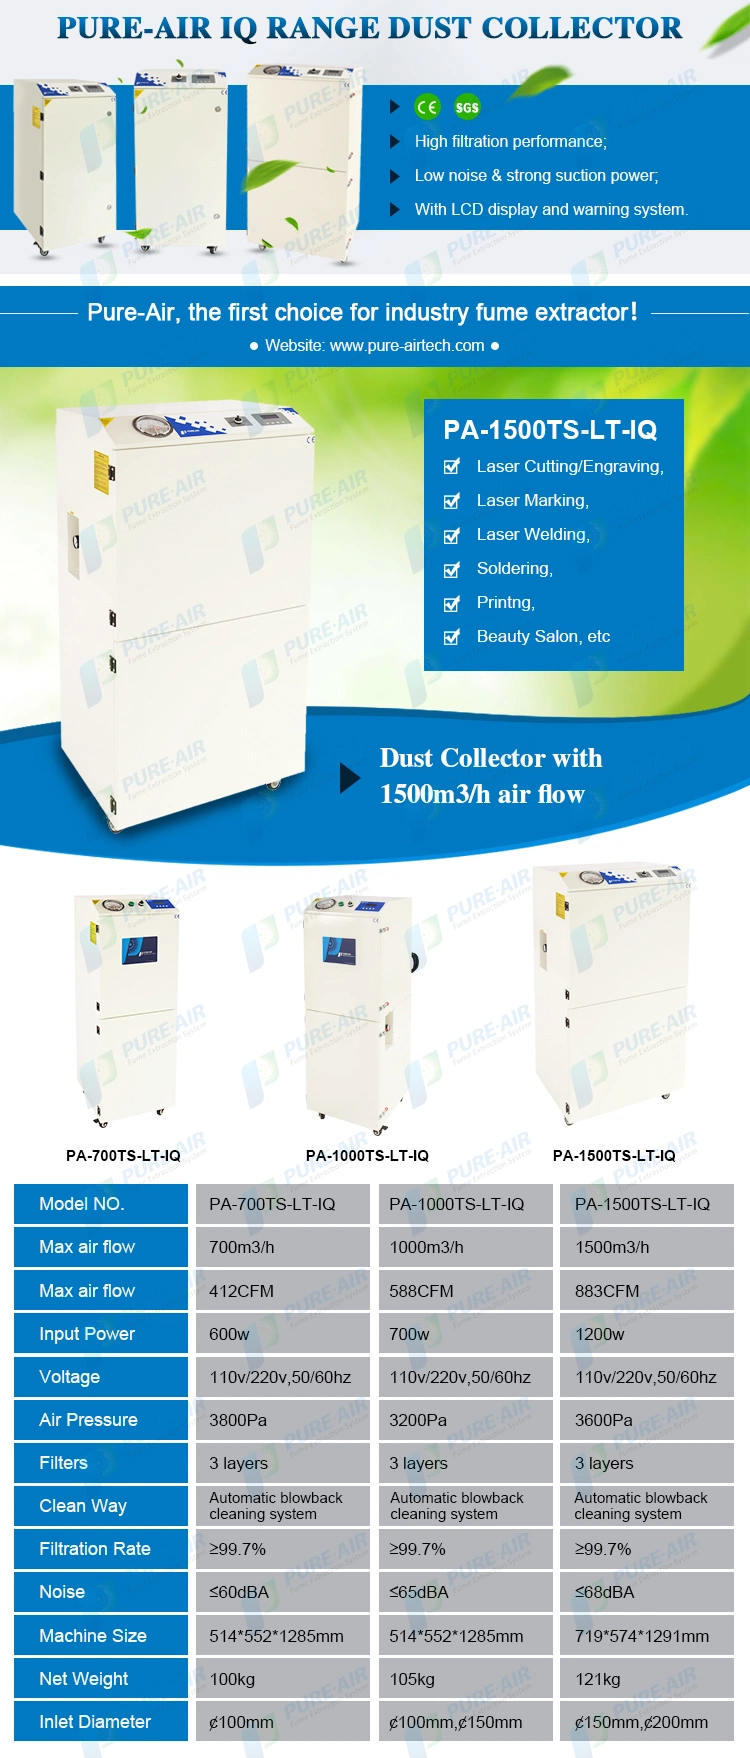 PA-1500ts-Lt-Iq High Power Laser Dust Collector for 1300*900mm CO2 Laser Cutting Wood/MDF/Plywood Dust Collection